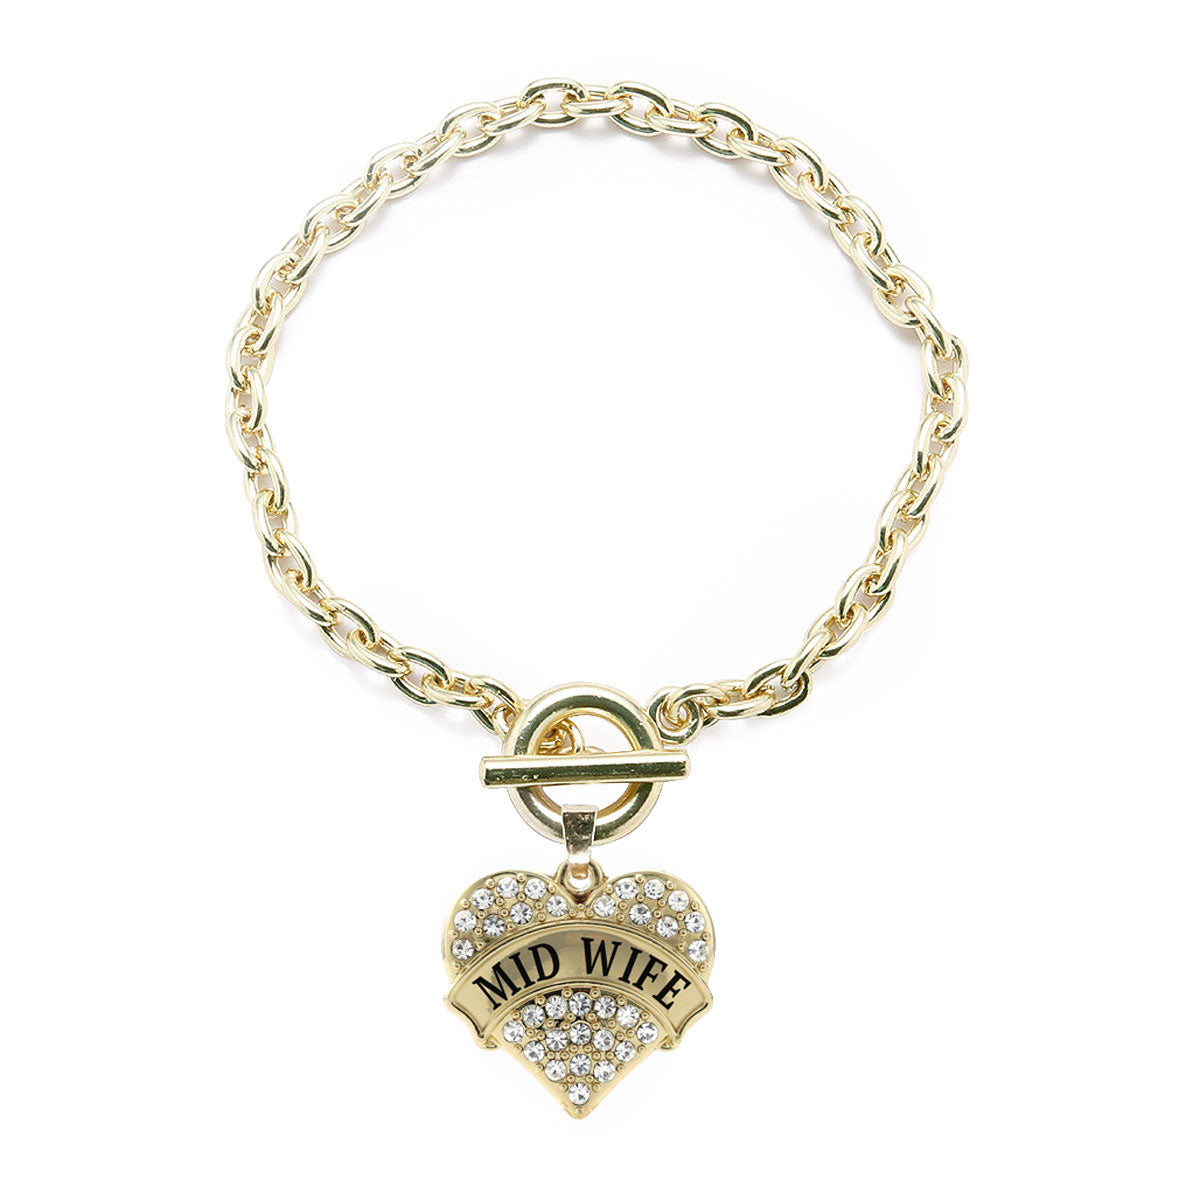 Gold Mid Wife Pave Heart Charm Toggle Bracelet